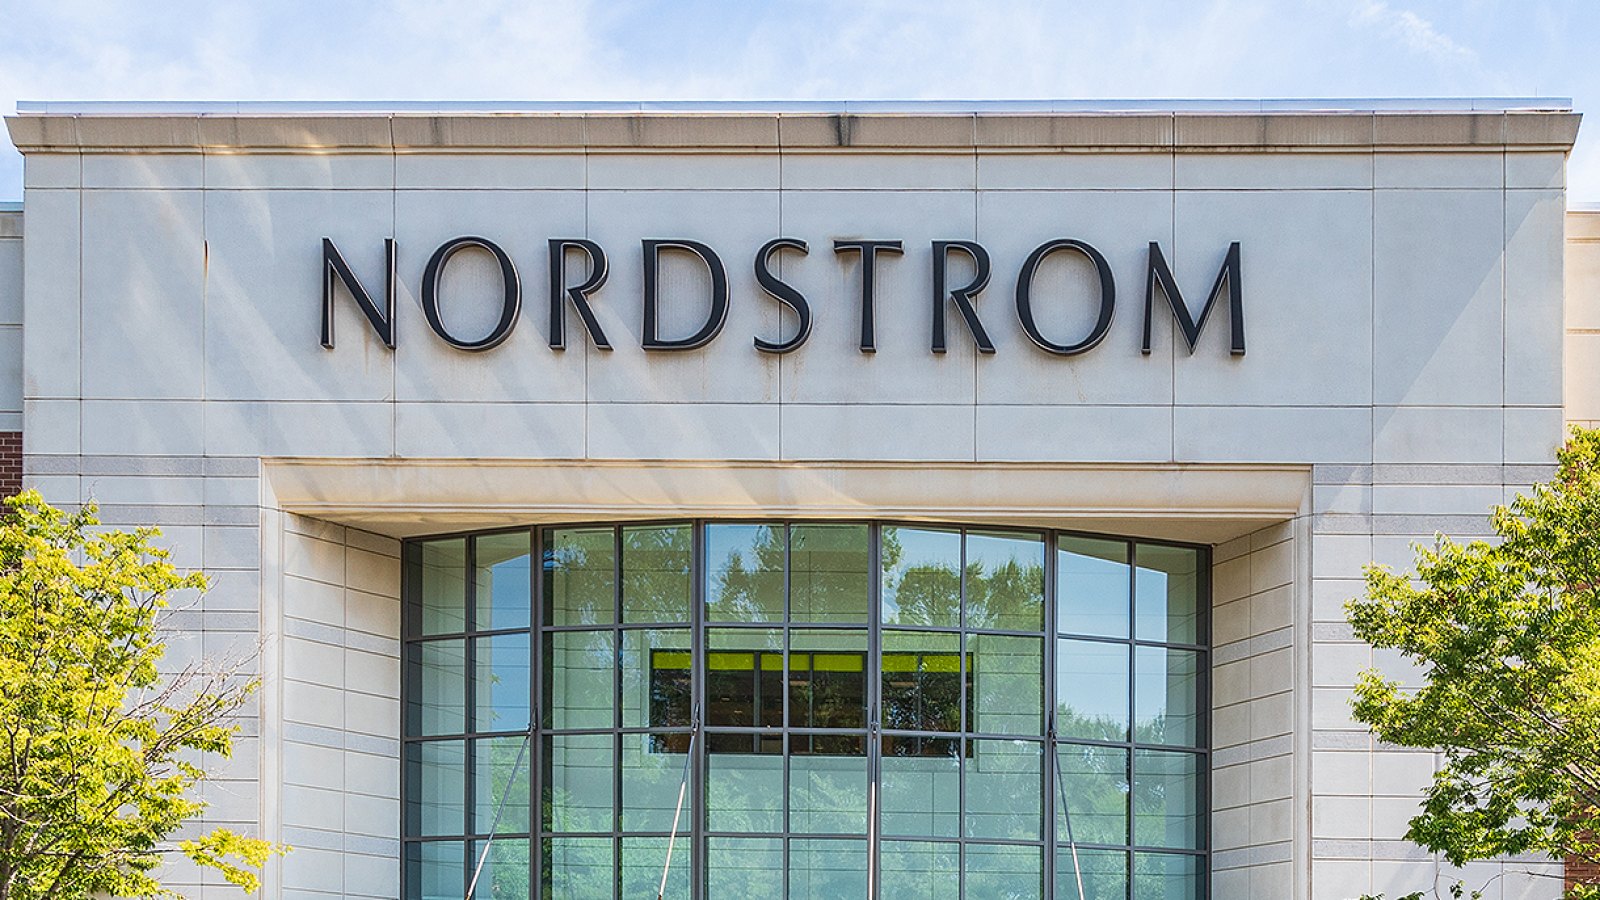 nordstrom-half-yearly-sale